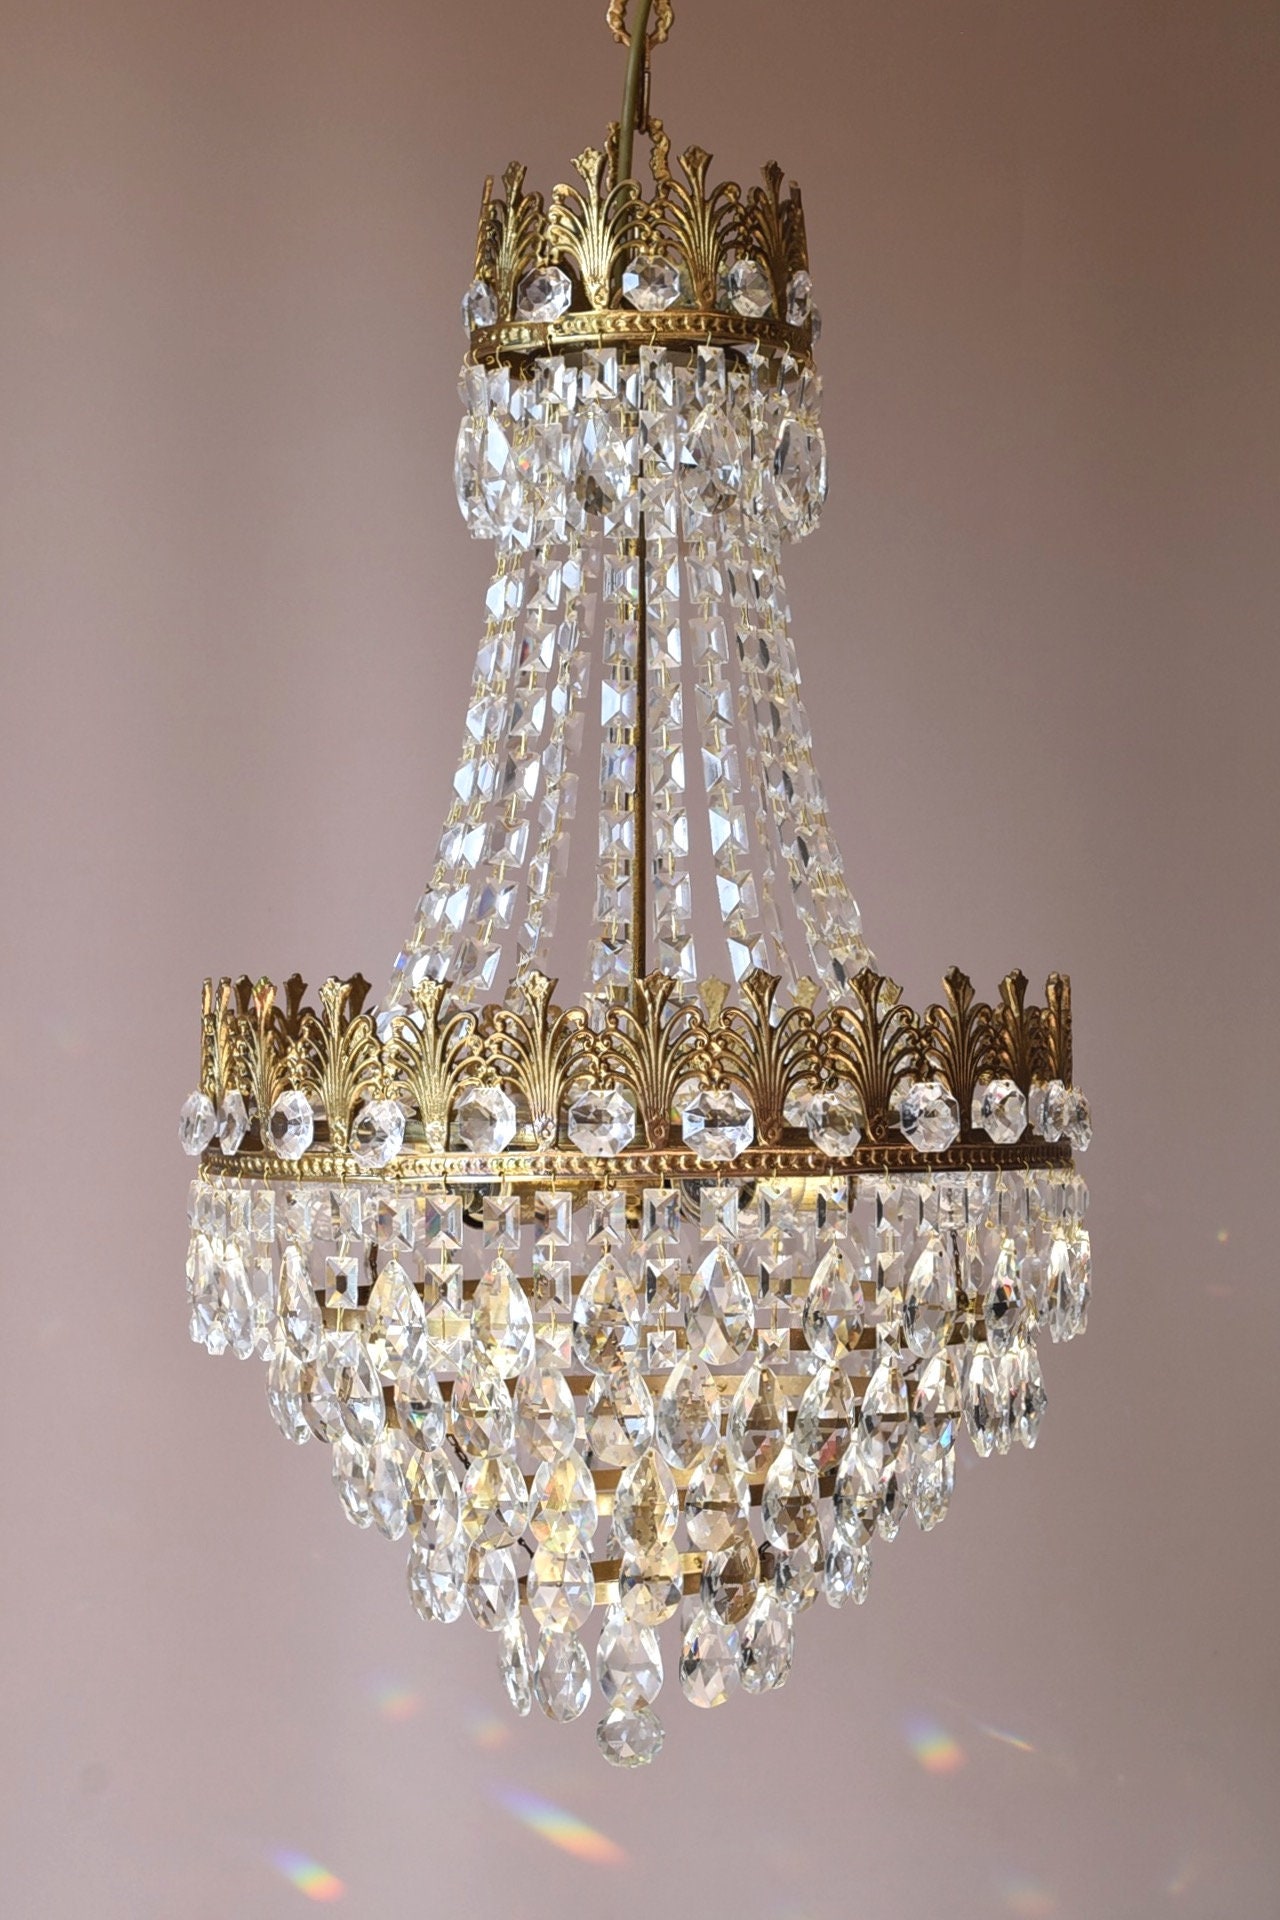 Antique French style Chandelier, Home lighting, Antique Brass Crystal Chandelier, French Style Ceiling Lighting Hallway dining lamp Lightthumbnail